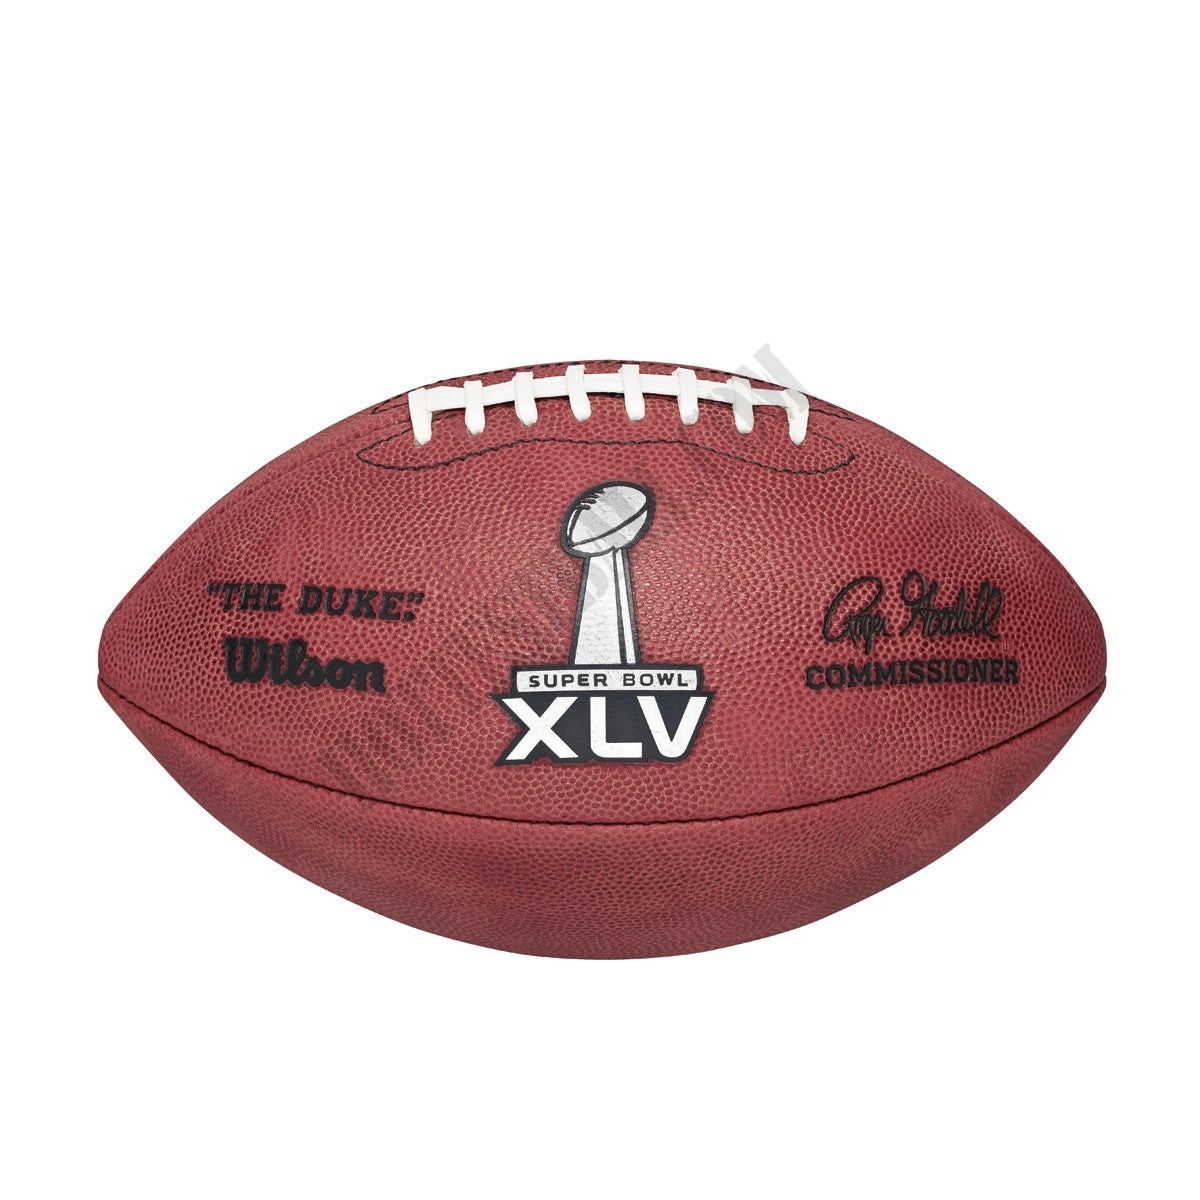 Super Bowl XLV Game Football - Green Bay Packers ● Wilson Promotions - -0